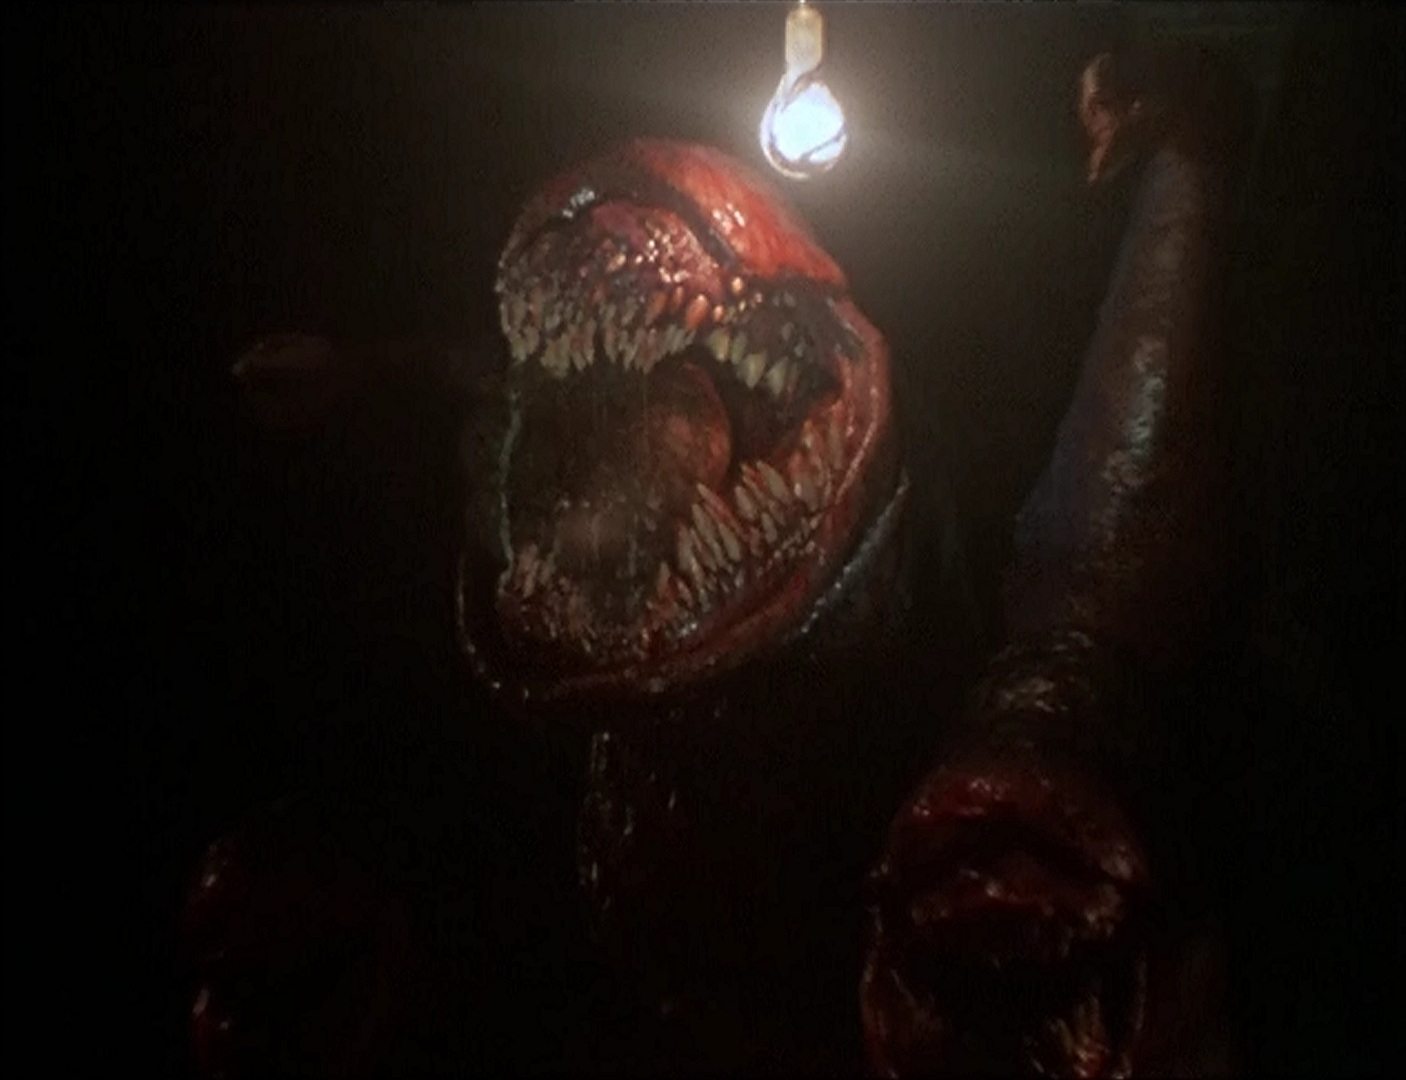 http://sinsofcinema.com/Images/Deadly%20Spawn/Deadly%20Spawn%20Synapse.jpg